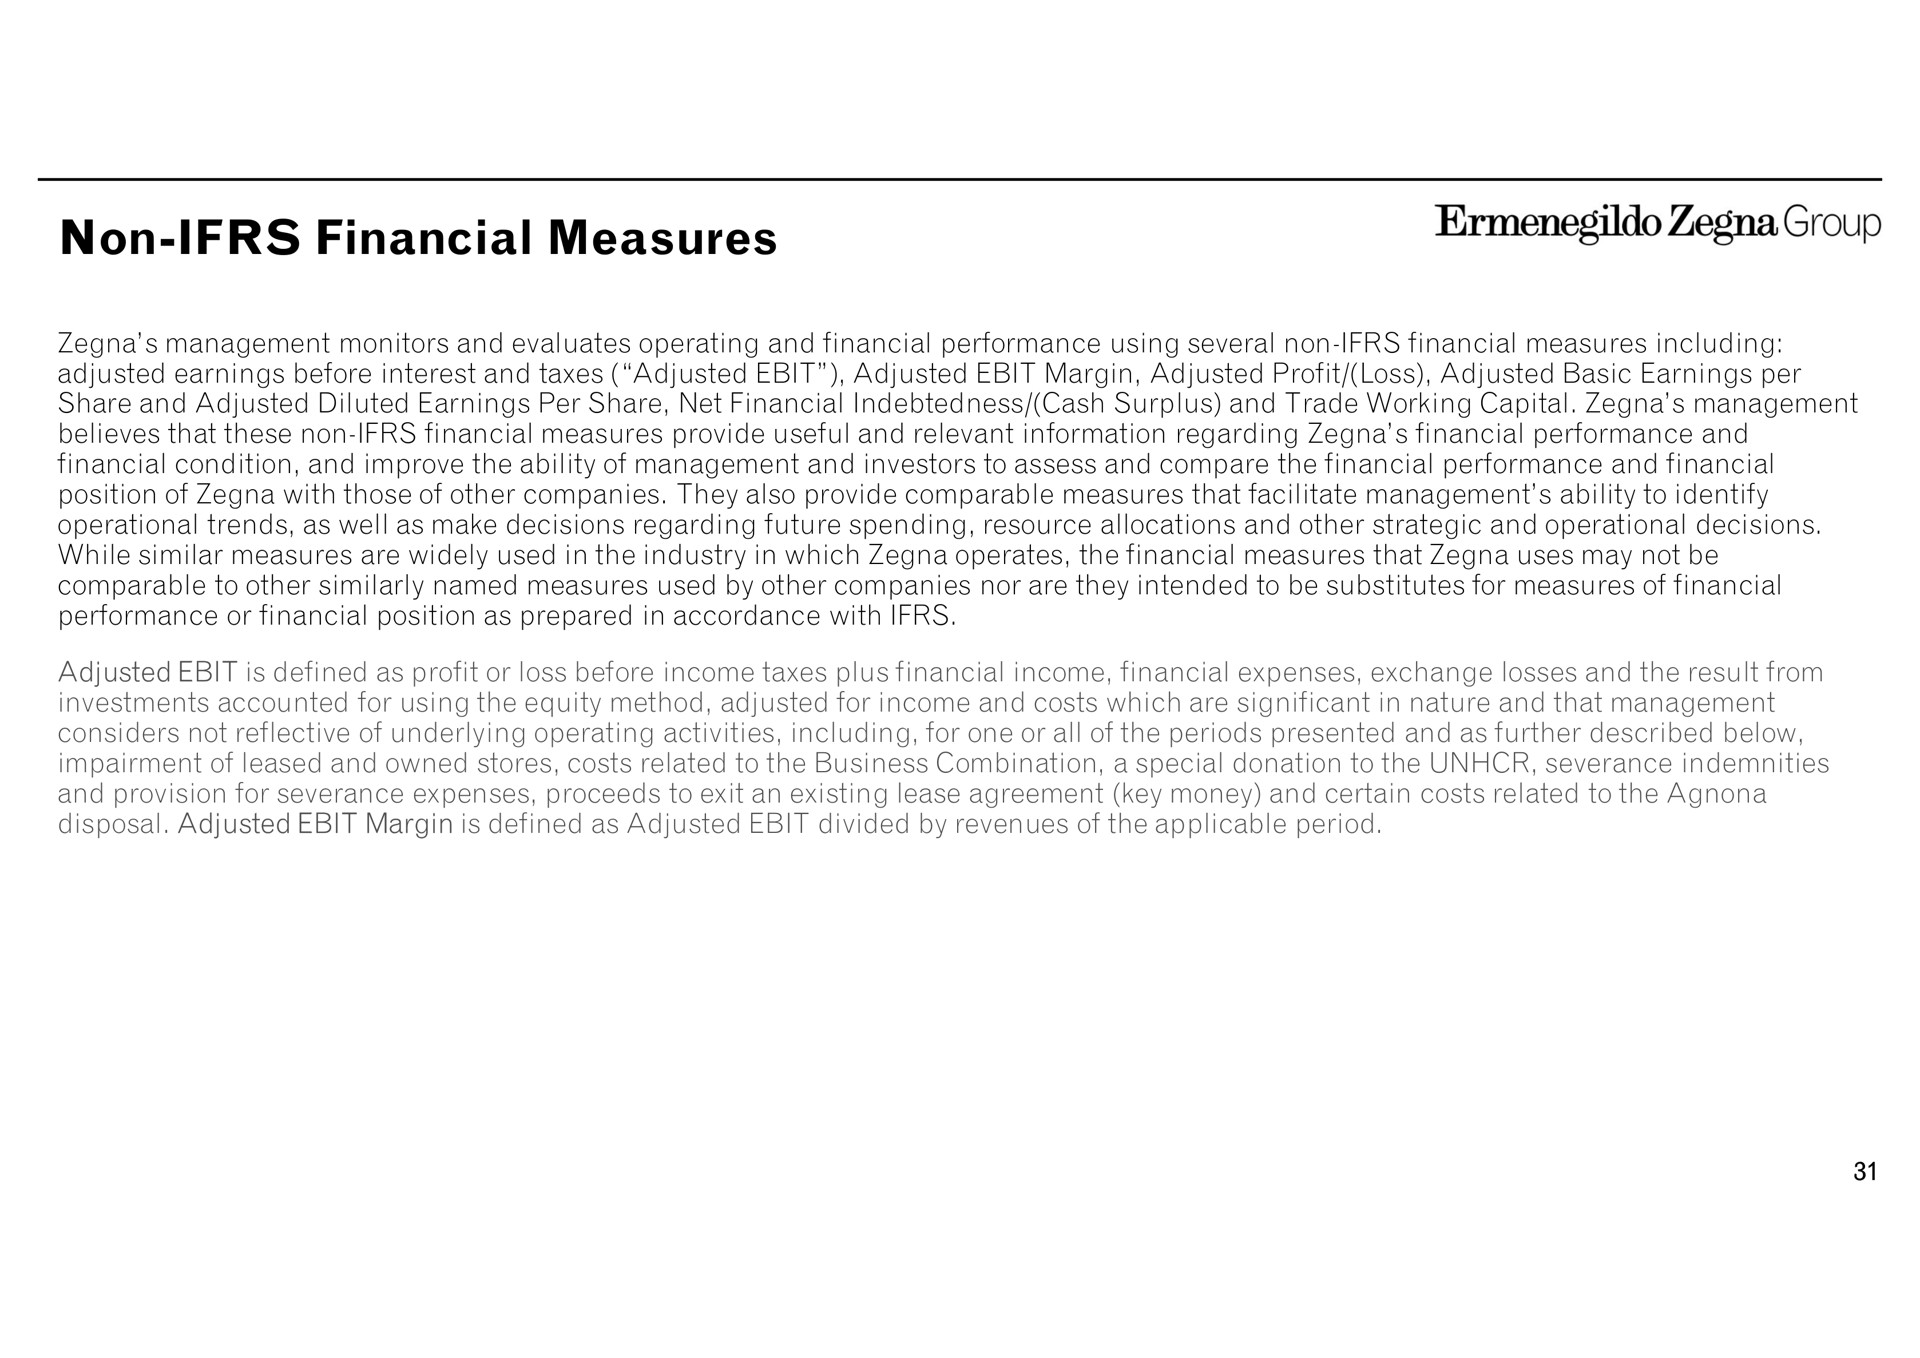 non financial measures group non provide useful and relevant information regarding performance and management monitors and evaluates operating and performance using several including adjusted earnings before interest and taxes adjusted adjusted margin adjusted profit loss adjusted basic earnings per share and adjusted diluted earnings per share net indebtedness cash and trade working capital believes that condition and improve the ability of management and investors to assess and compare the performance and position of with those of other companies they also provide comparable that facilitate management ability to identify operational trends as well as make decisions regarding future spending resource allocations and other strategic and operational decisions while similar are widely used in the industry in which operates the that uses may not be comparable to other similarly named used by other companies nor are they intended to be substitutes for of performance or position as prepared in accordance with management adjusted is defined as profit or loss before income taxes plus income expenses exchange losses and the result from investments accounted for using the equity method adjusted for income and costs which are significant in nature and that management considers not reflective of underlying operating activities including for one or all of the periods presented and as further described below impairment of leased and owned stores costs related to and provision for severance expenses proceeds to exit an existing lease agreement key money and certain costs related to the disposal adjusted margin is defined as adjusted divided by revenues of the applicable period the business combination a special donation to the severance indemnities | Zegna